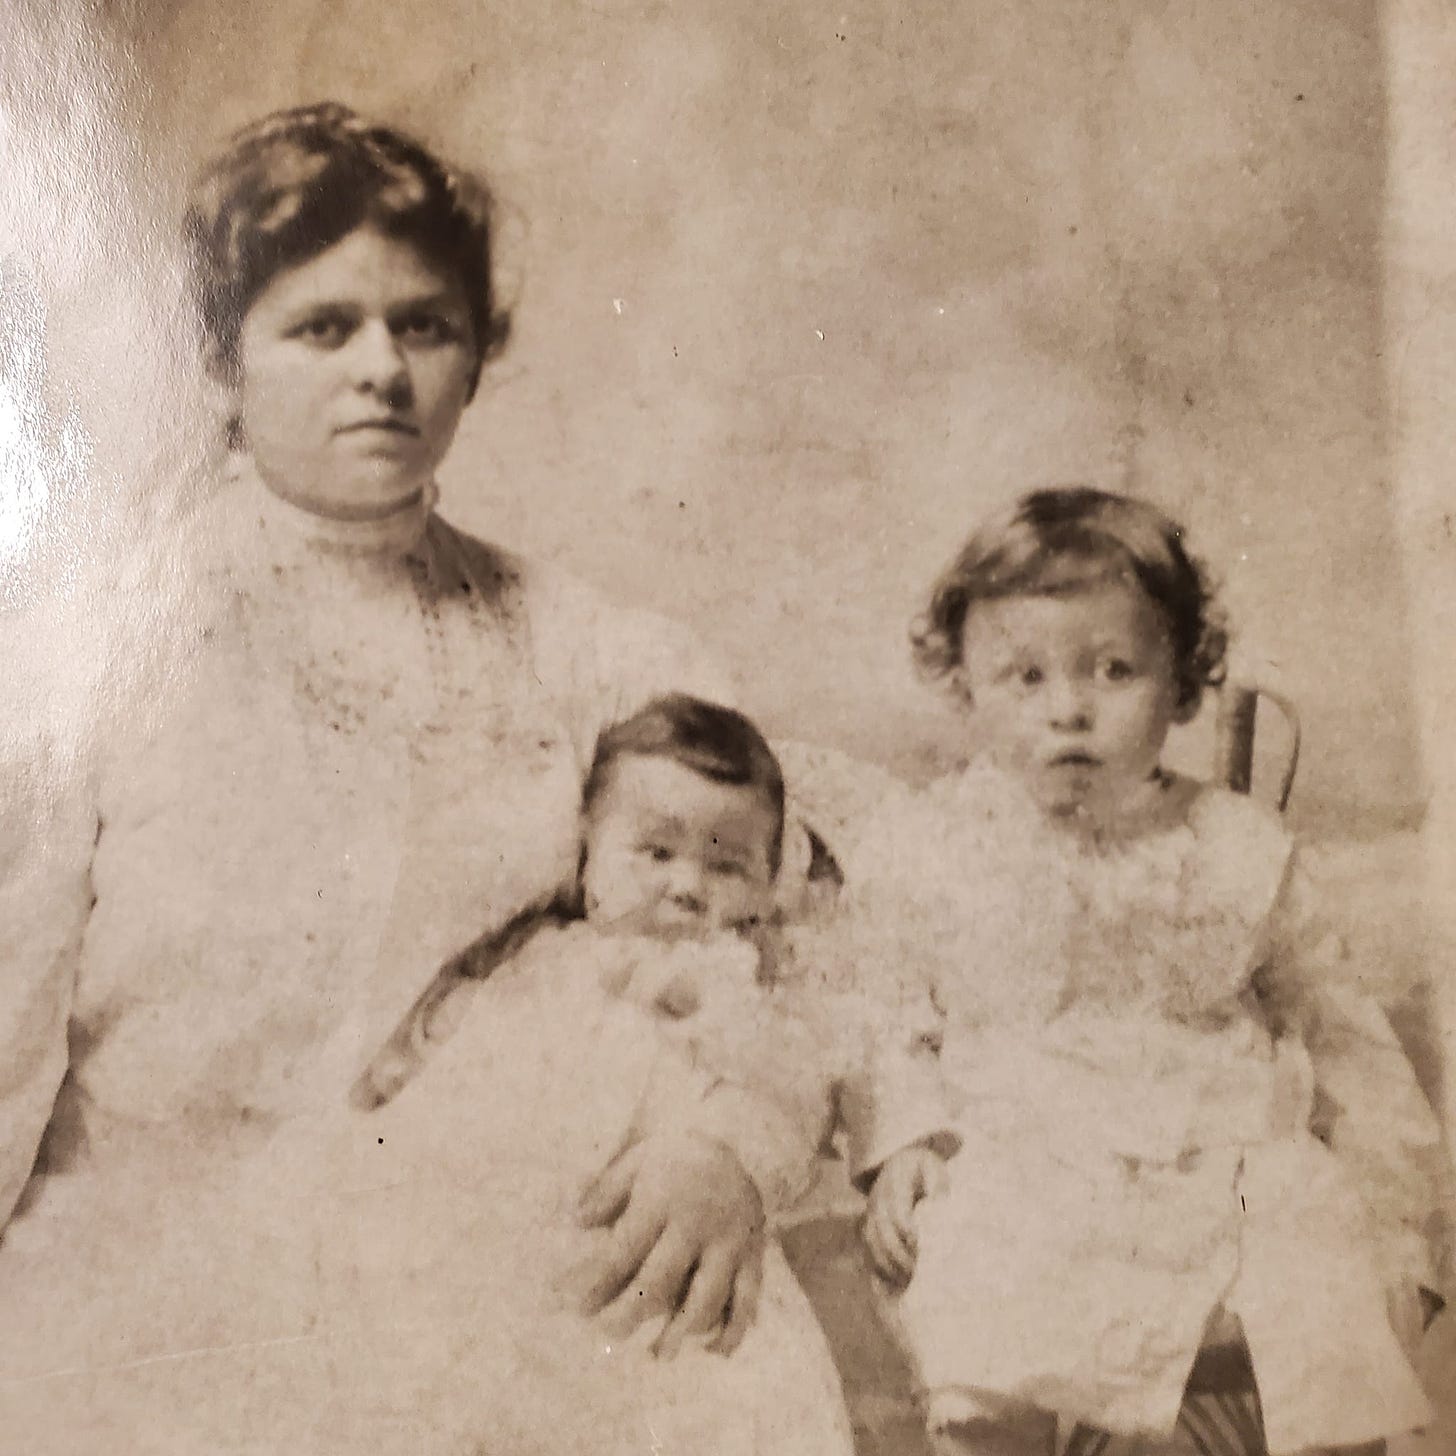 A black and white photo of a dark-haired white woman, an infant, and a toddler, all dressed in white dresses.